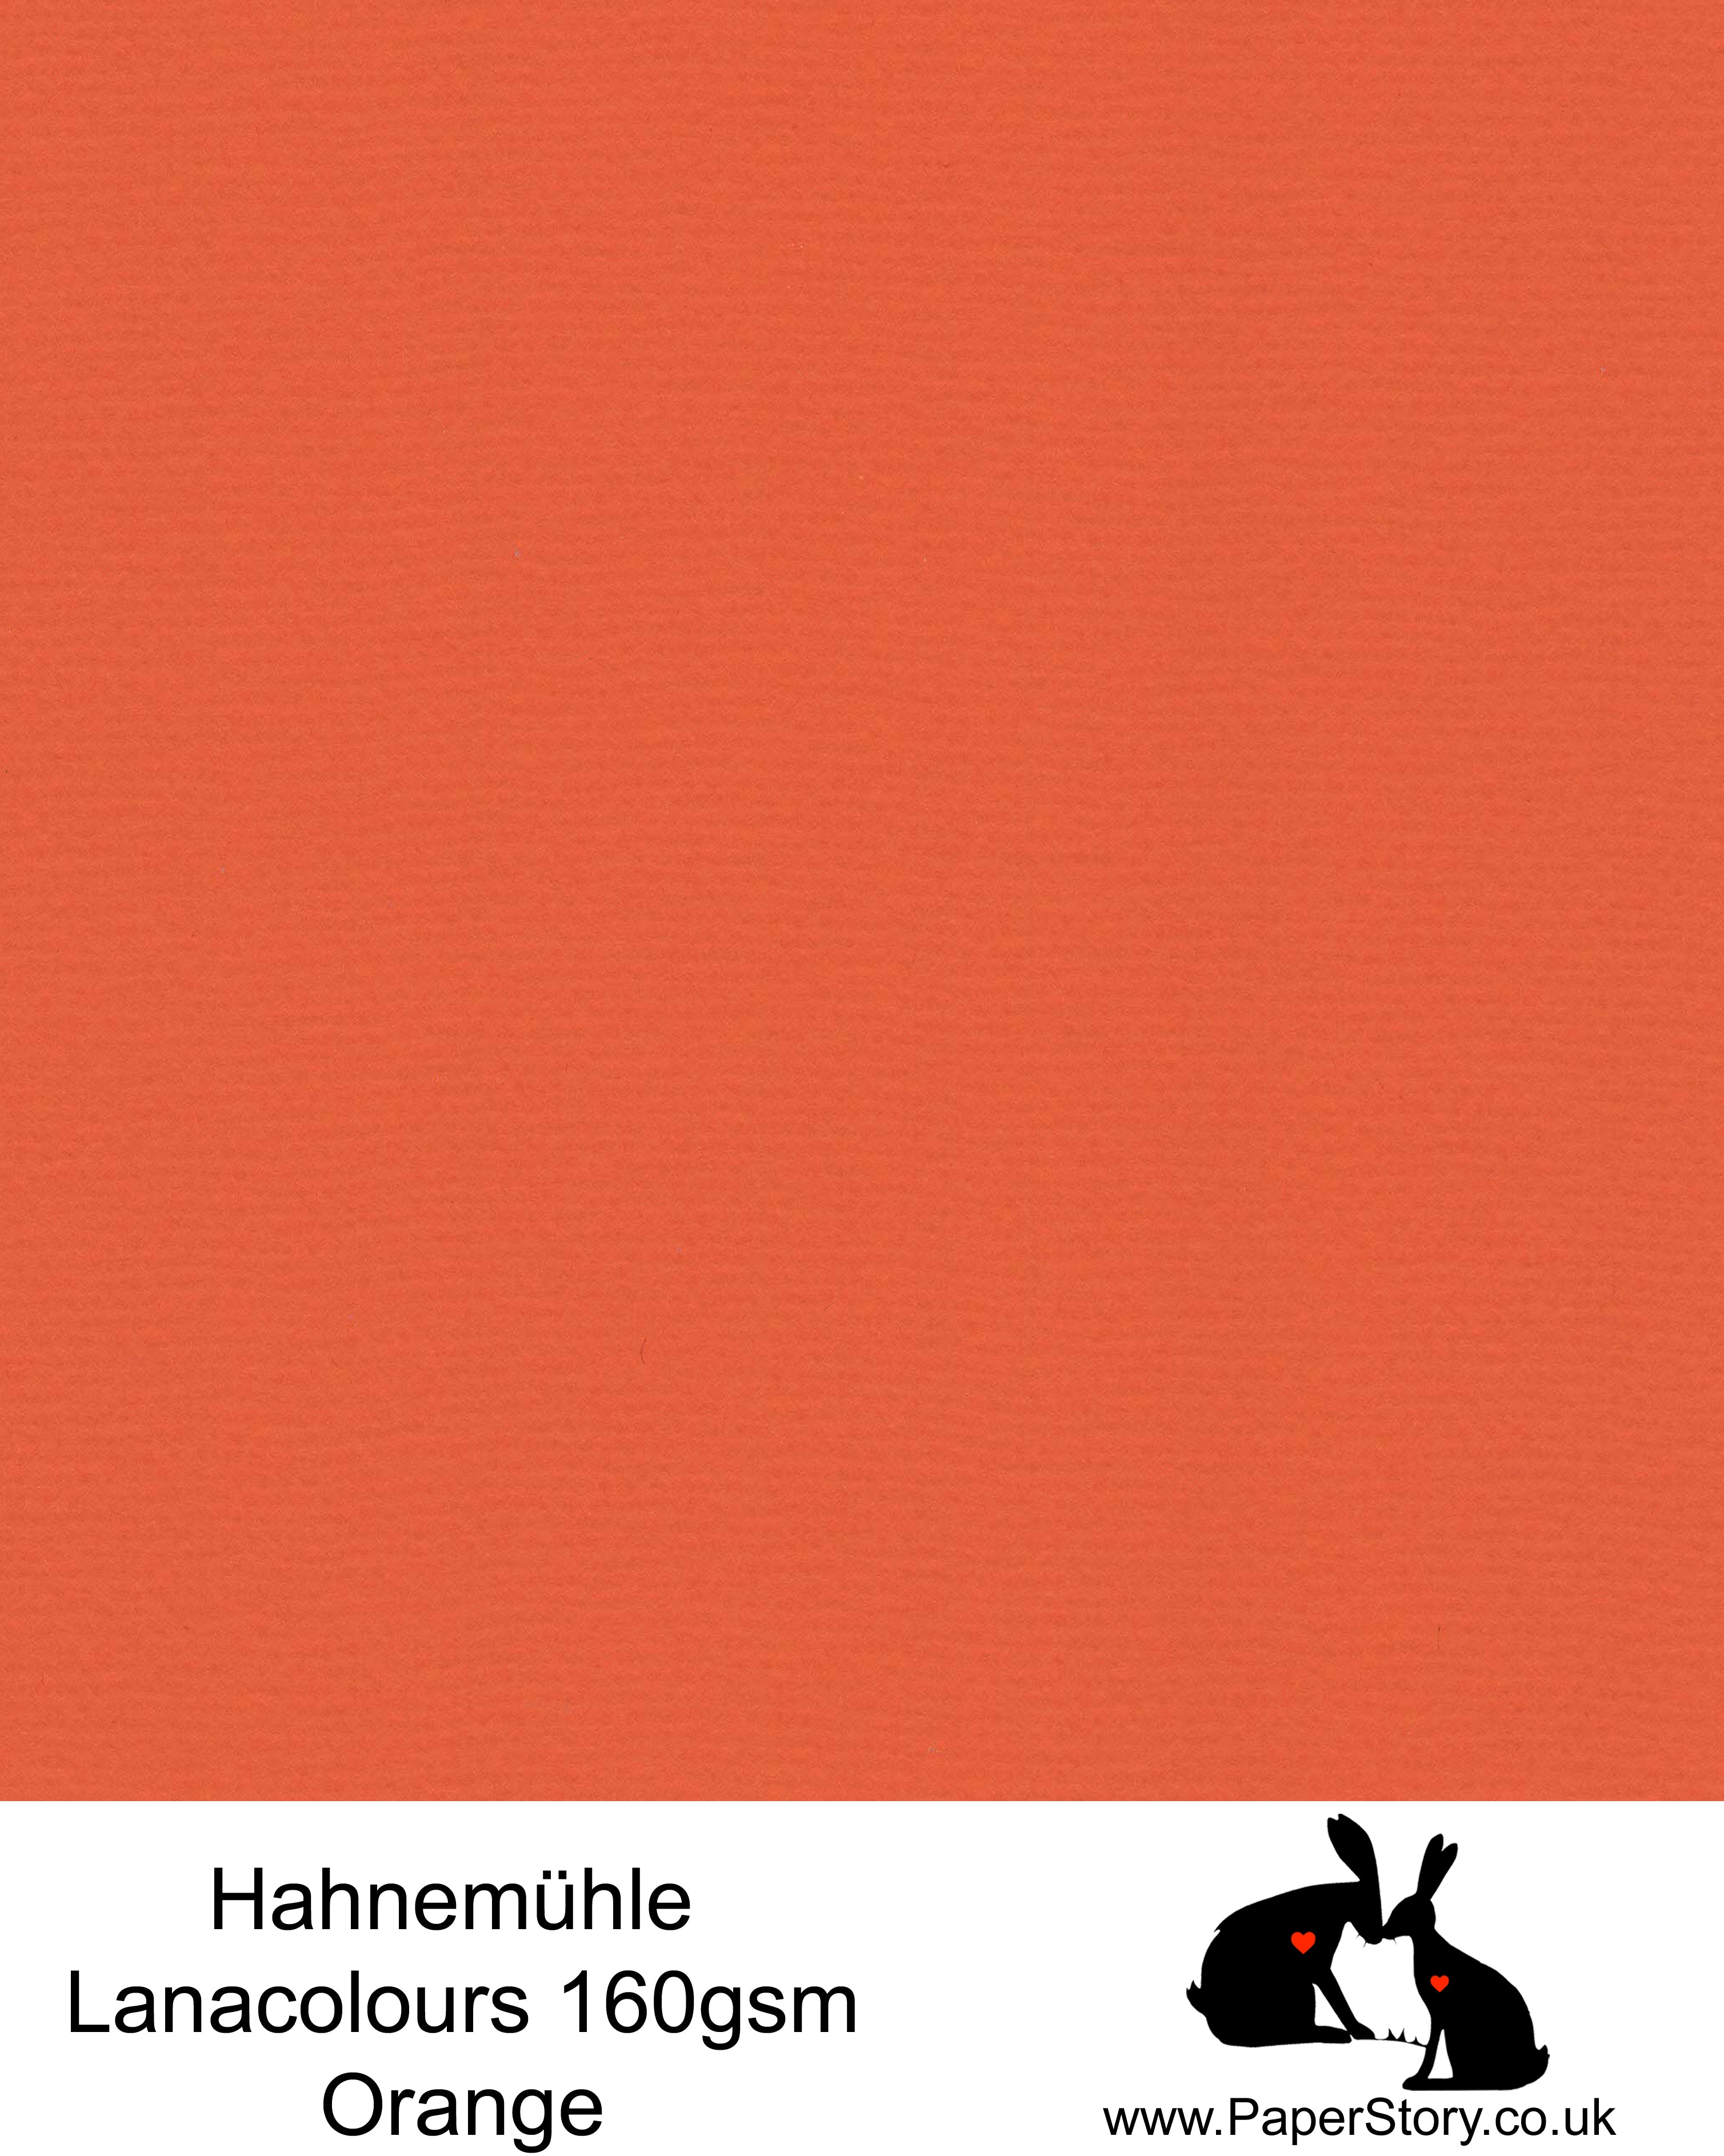 Hahnemühle Lana Colours pastel Orange hammered paper 160 gsm. Artist Premium Pastel and Papercutting Papers 160 gsm often described as hammered paper. This high quality artist paper, can be used for papercutting as well as mixed media